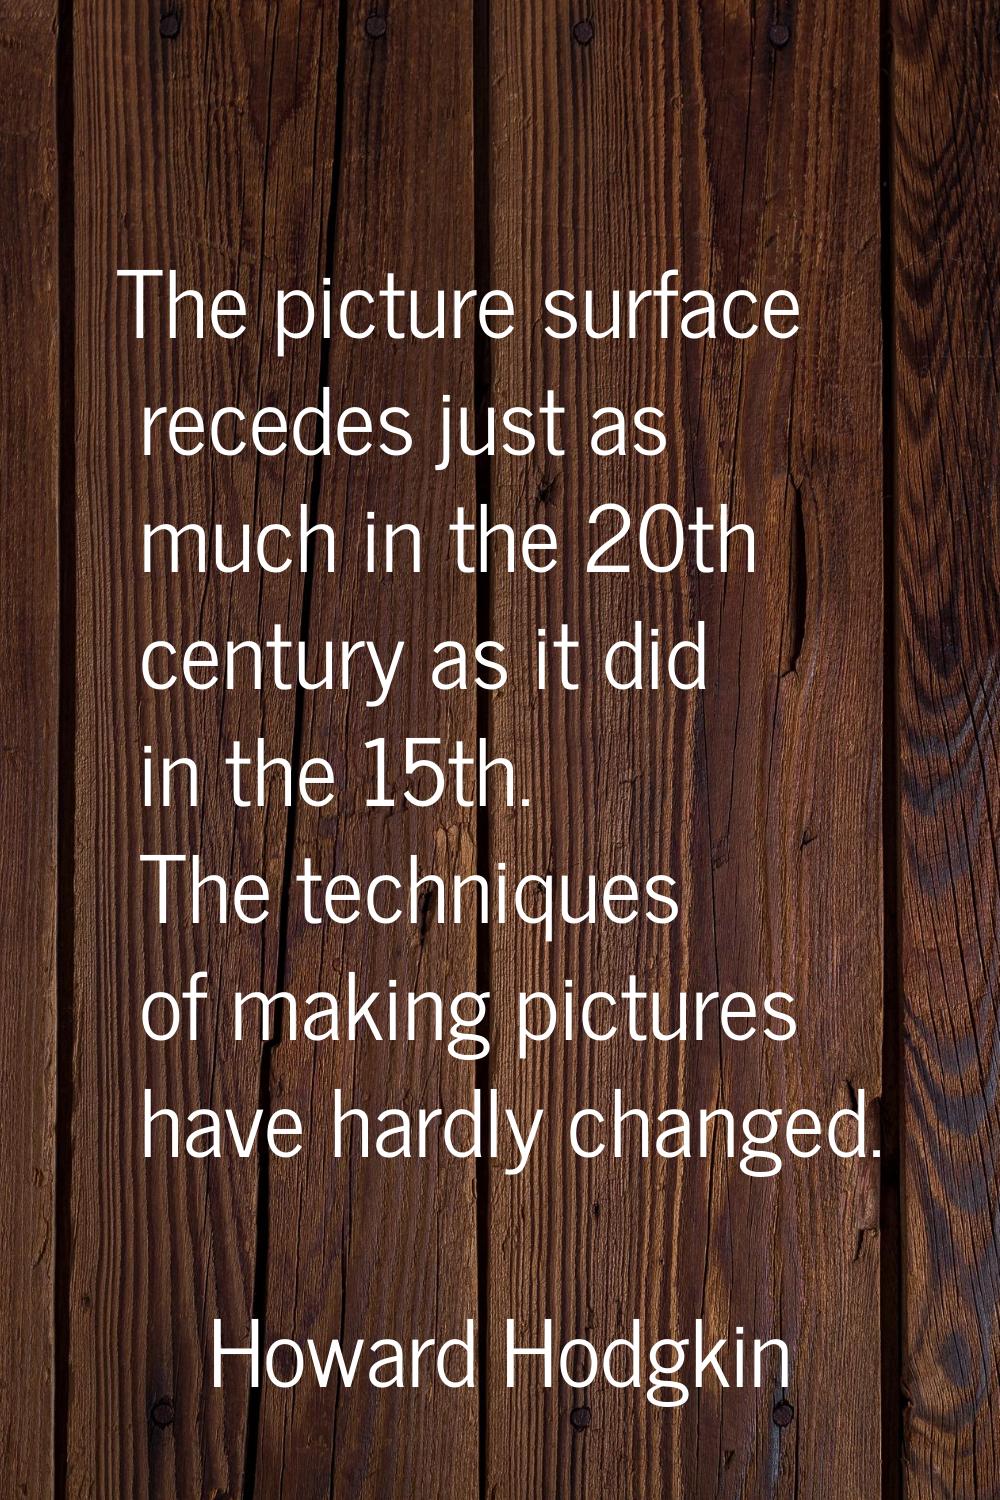 The picture surface recedes just as much in the 20th century as it did in the 15th. The techniques 